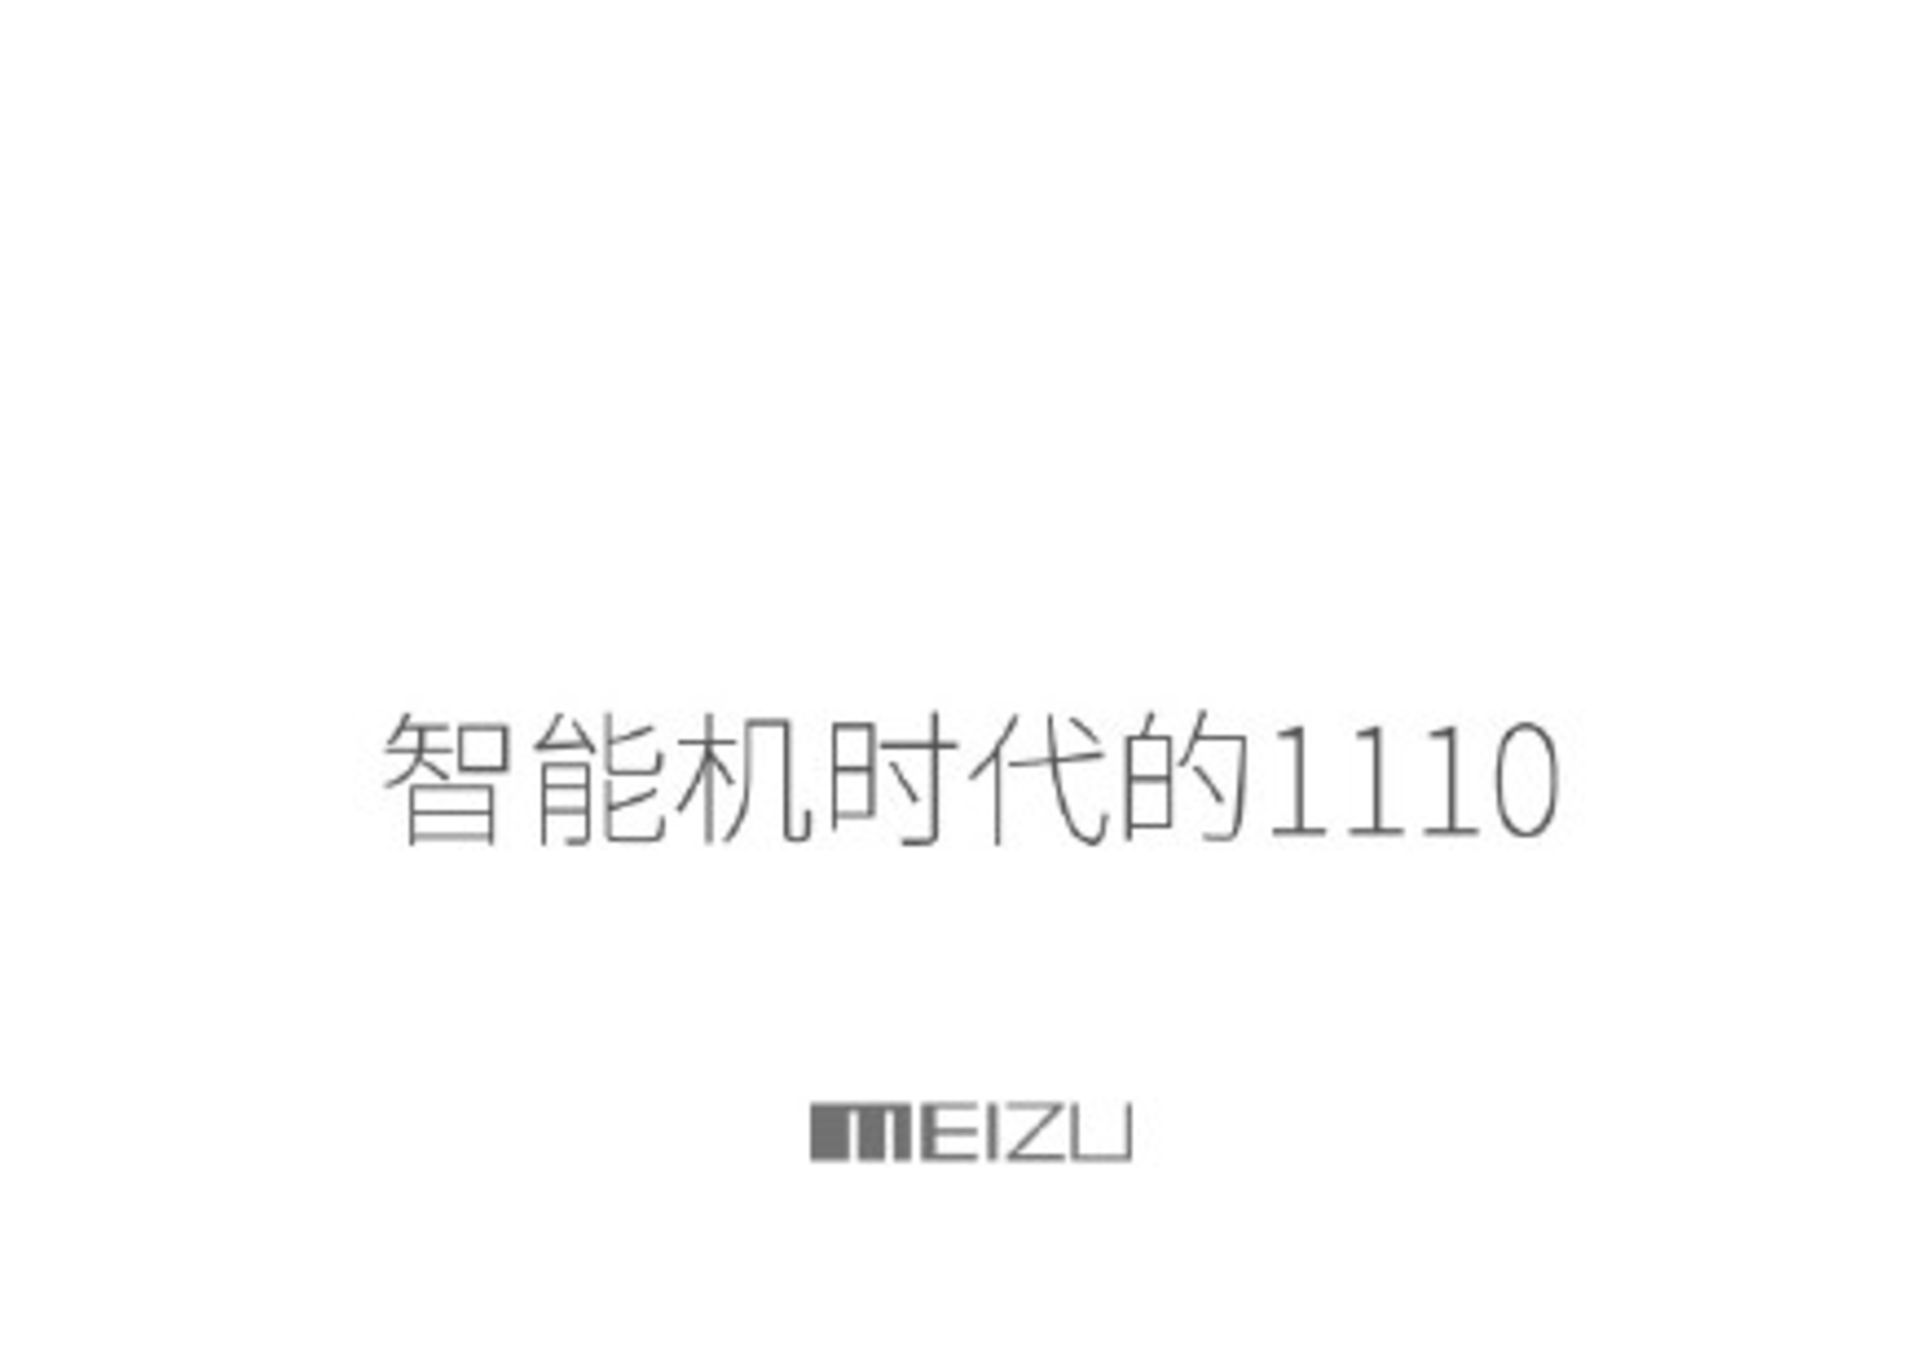 More teasing from Meizu